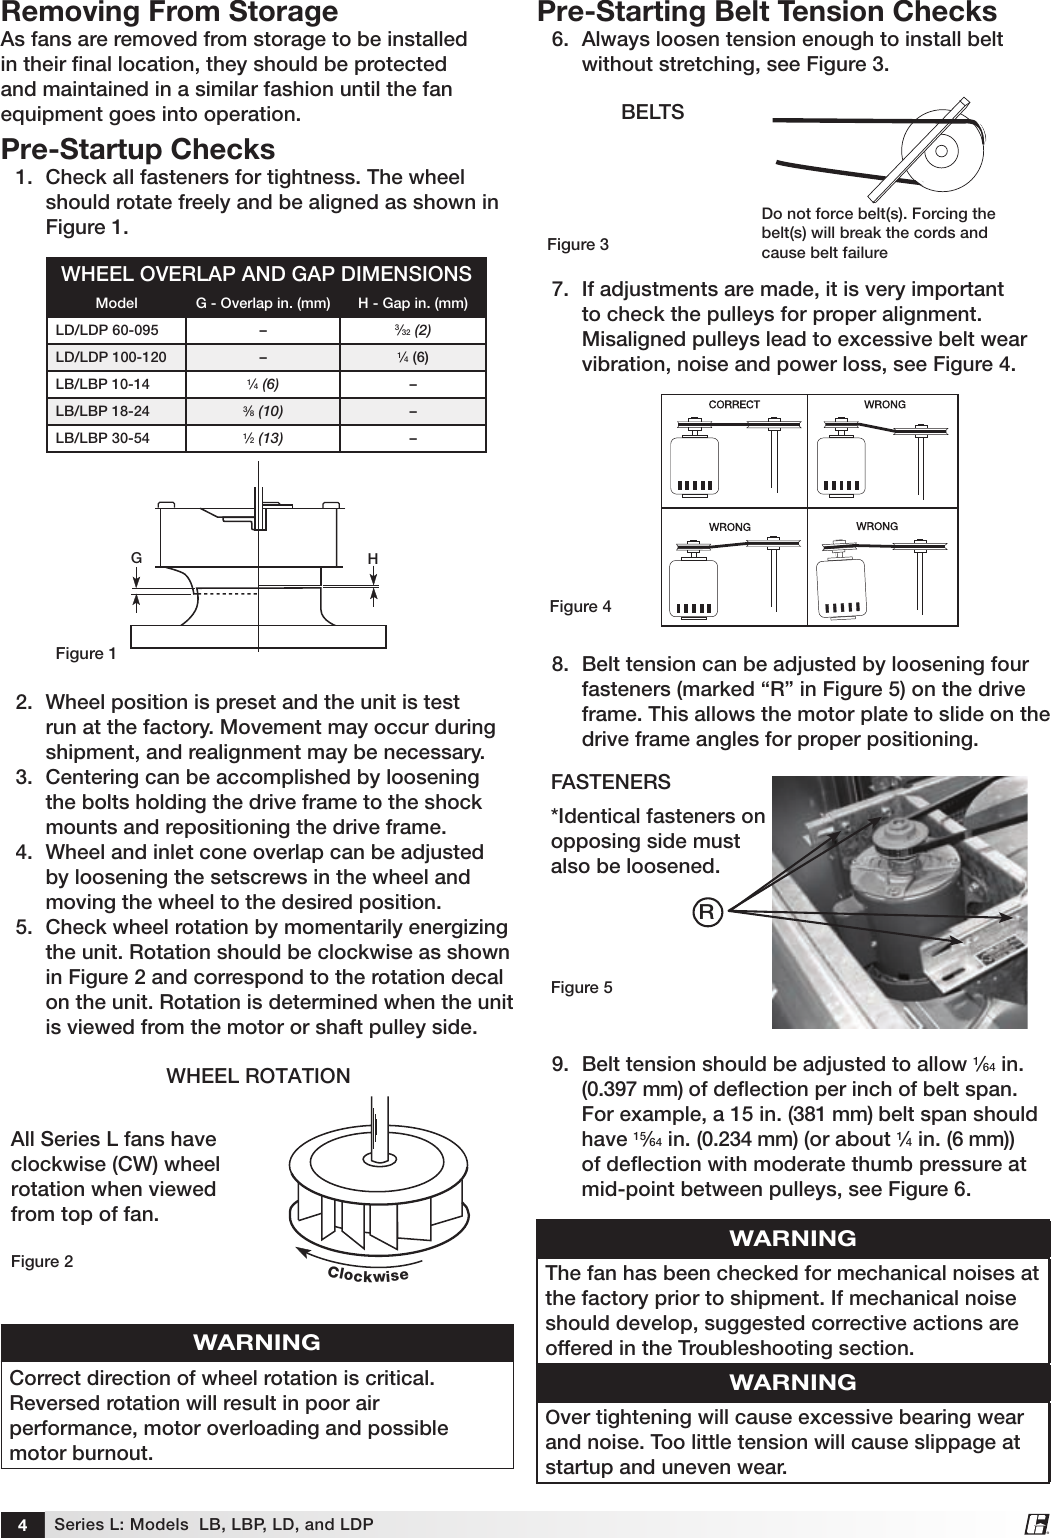 Page 4 of 8 - Greenheck-Fan Greenheck-Fan-Centrifugal-Roof-Exhaust-Fans-Lbp-Users-Manual-  Greenheck-fan-centrifugal-roof-exhaust-fans-lbp-users-manual